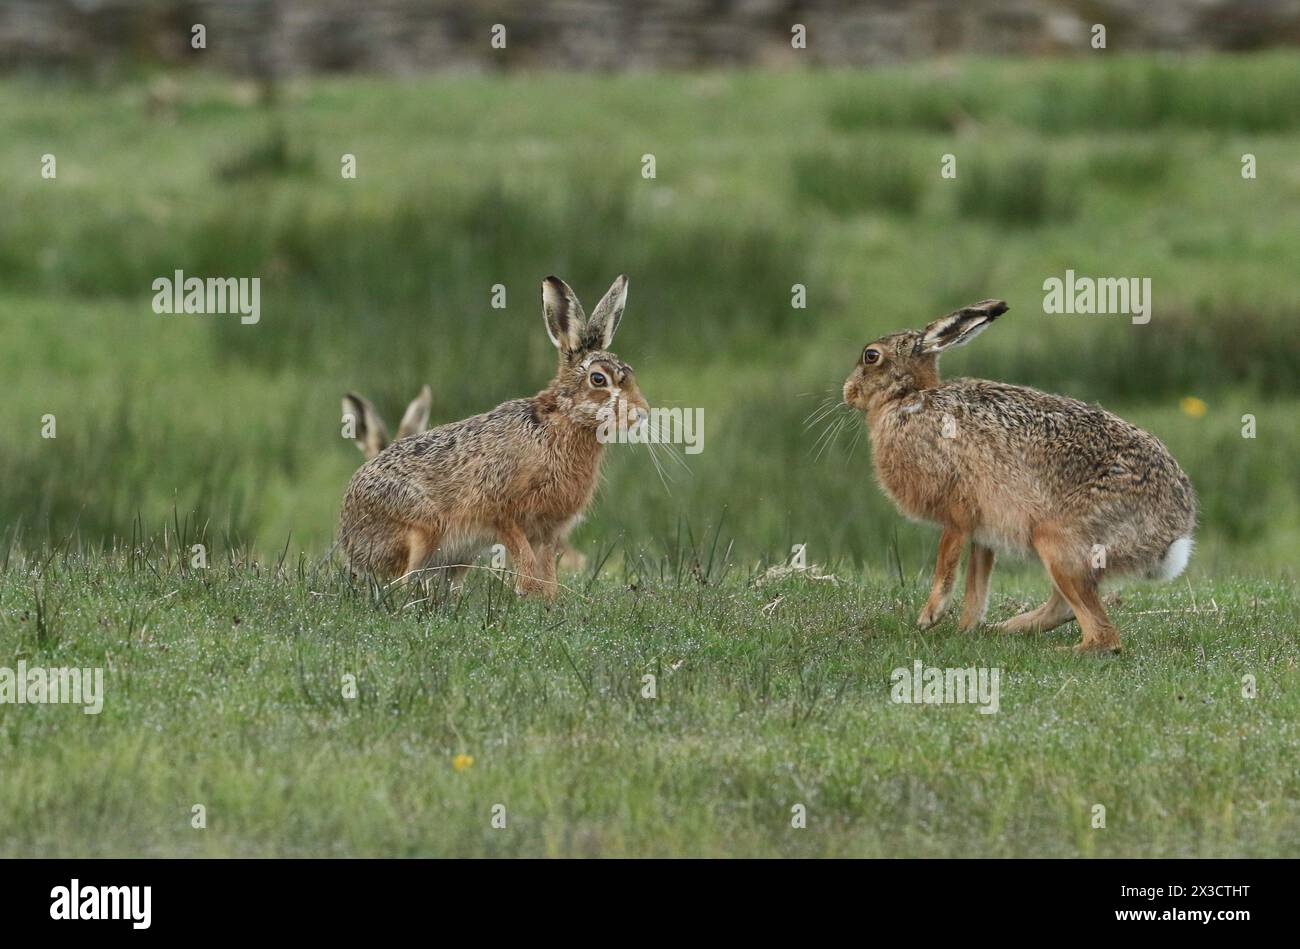 A number of Brown Hares, Lepus europaeus, following a female Hare in the Moors during breeding season. Stock Photo